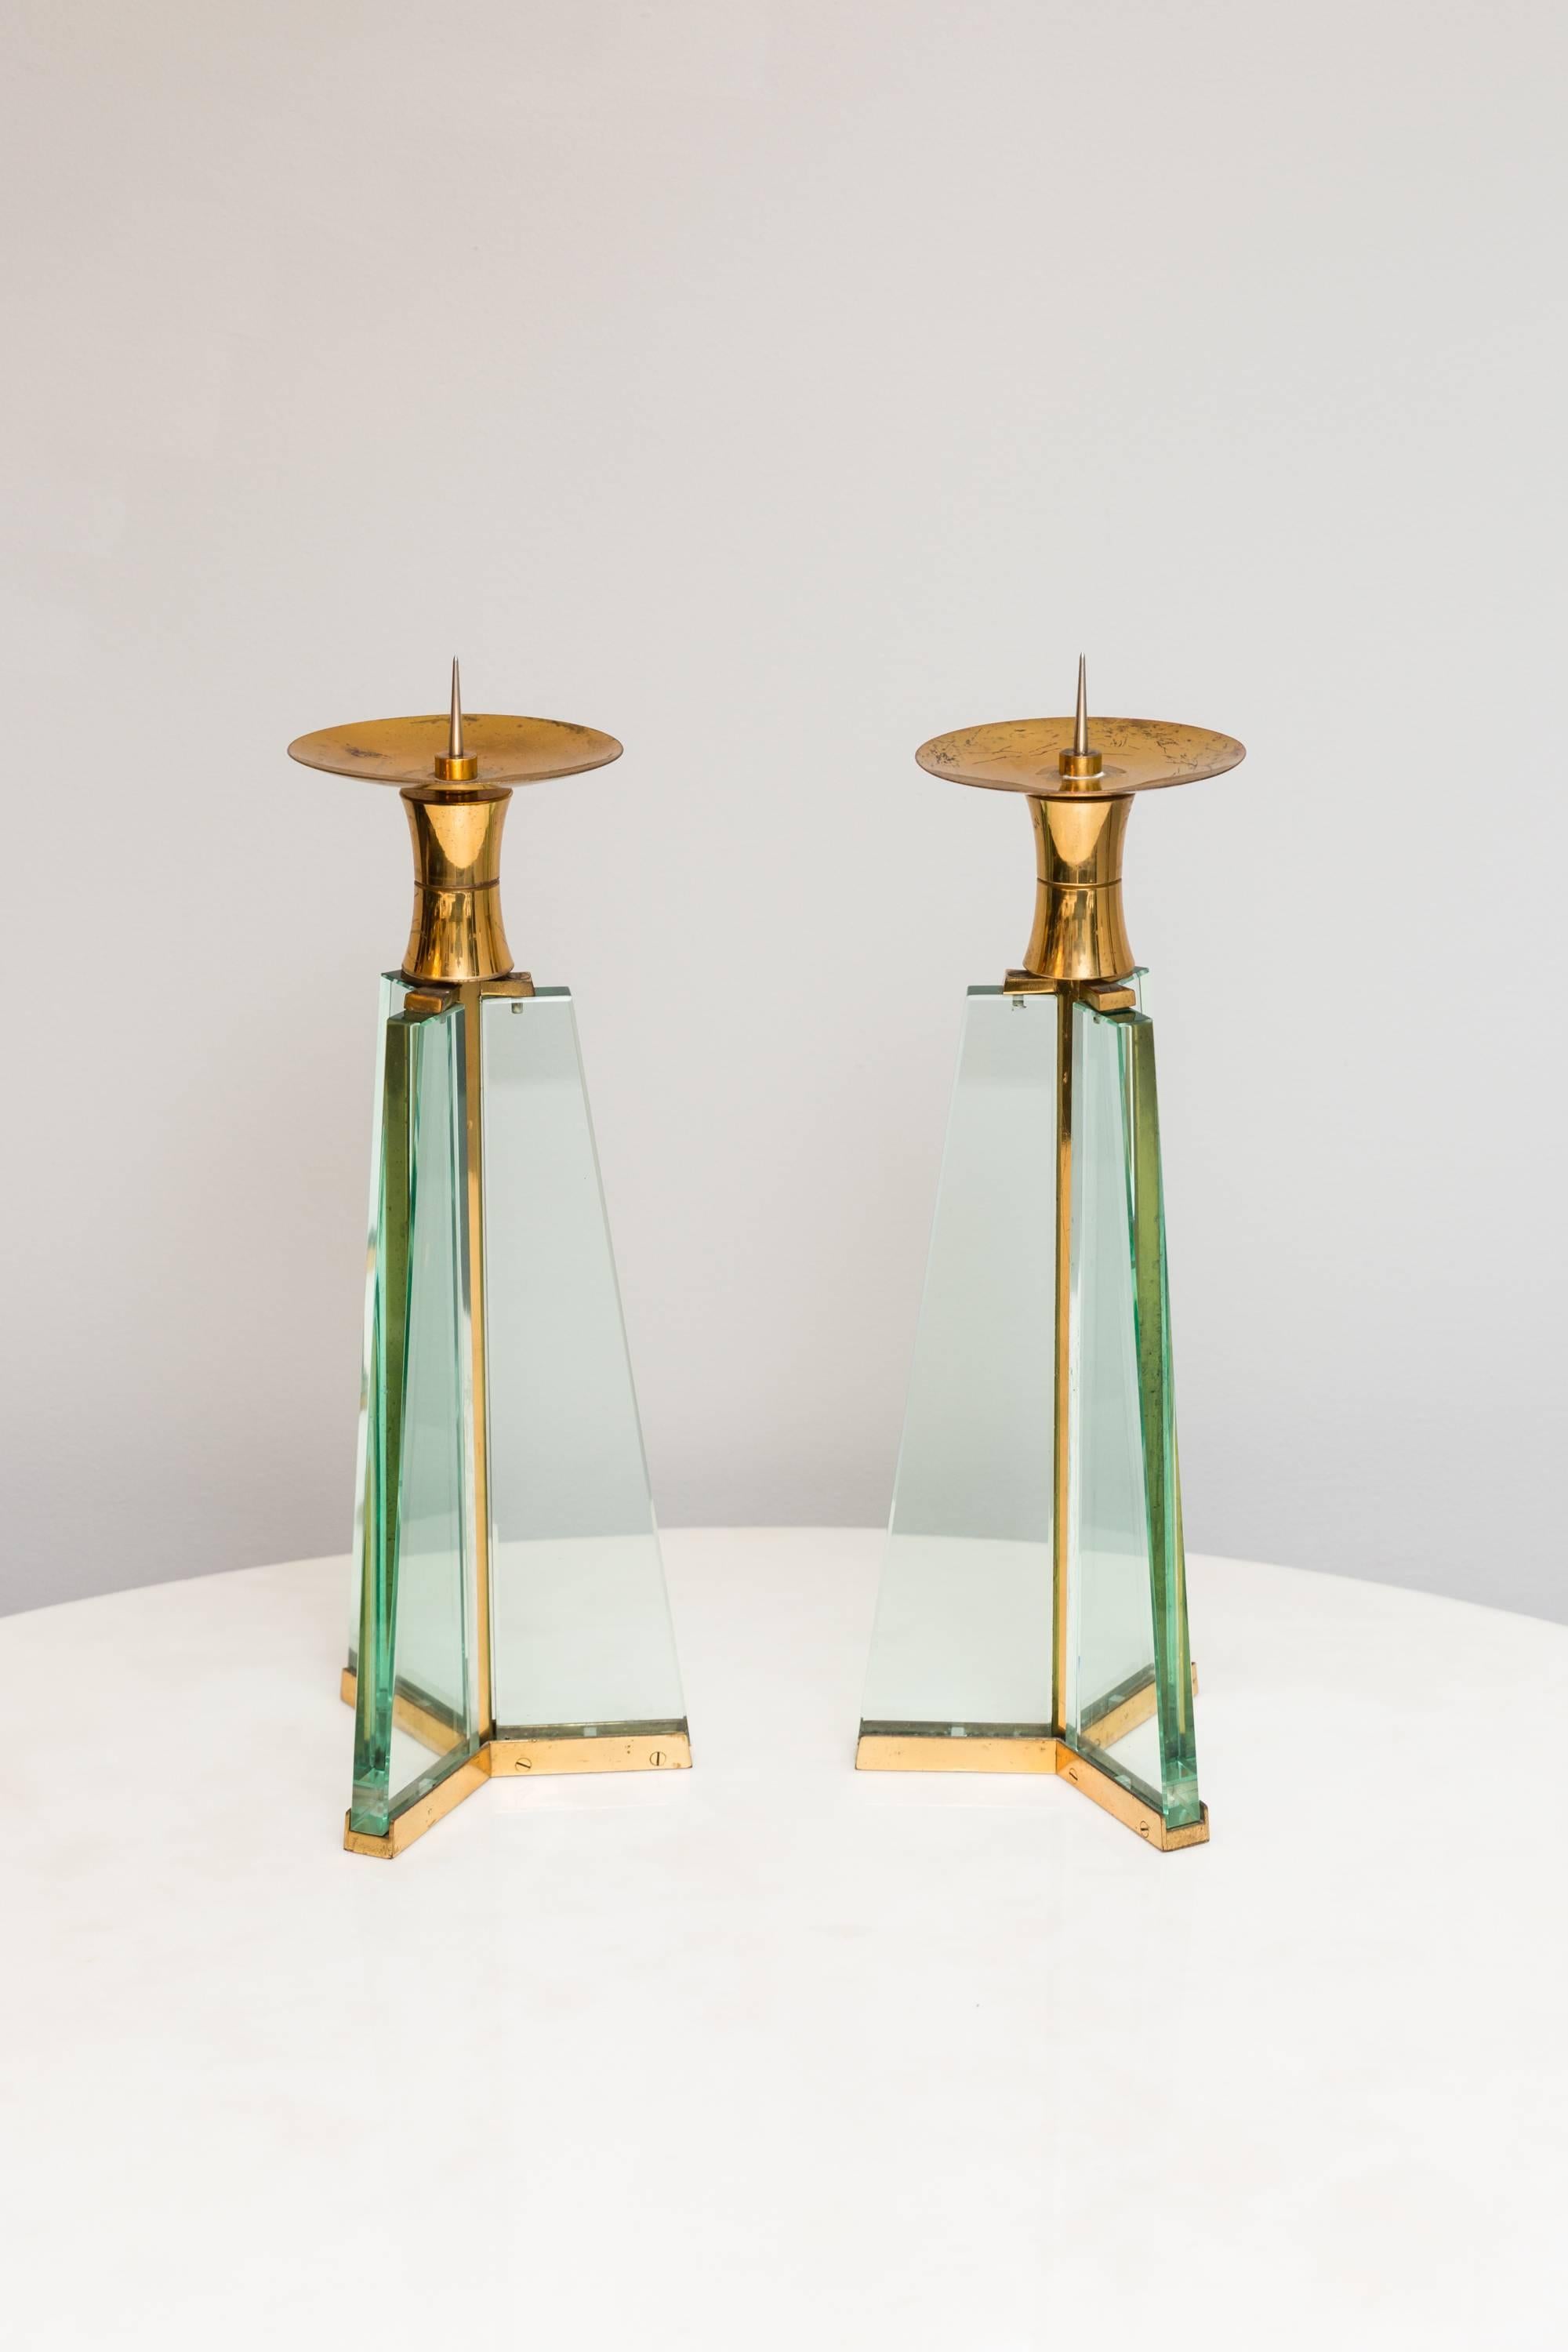 Rare pair of Fontana Arte, candle holder, glass, brass. Very good vintage condition. 
No chips in the glasses, light patina on the brass. 
Very rare to find!